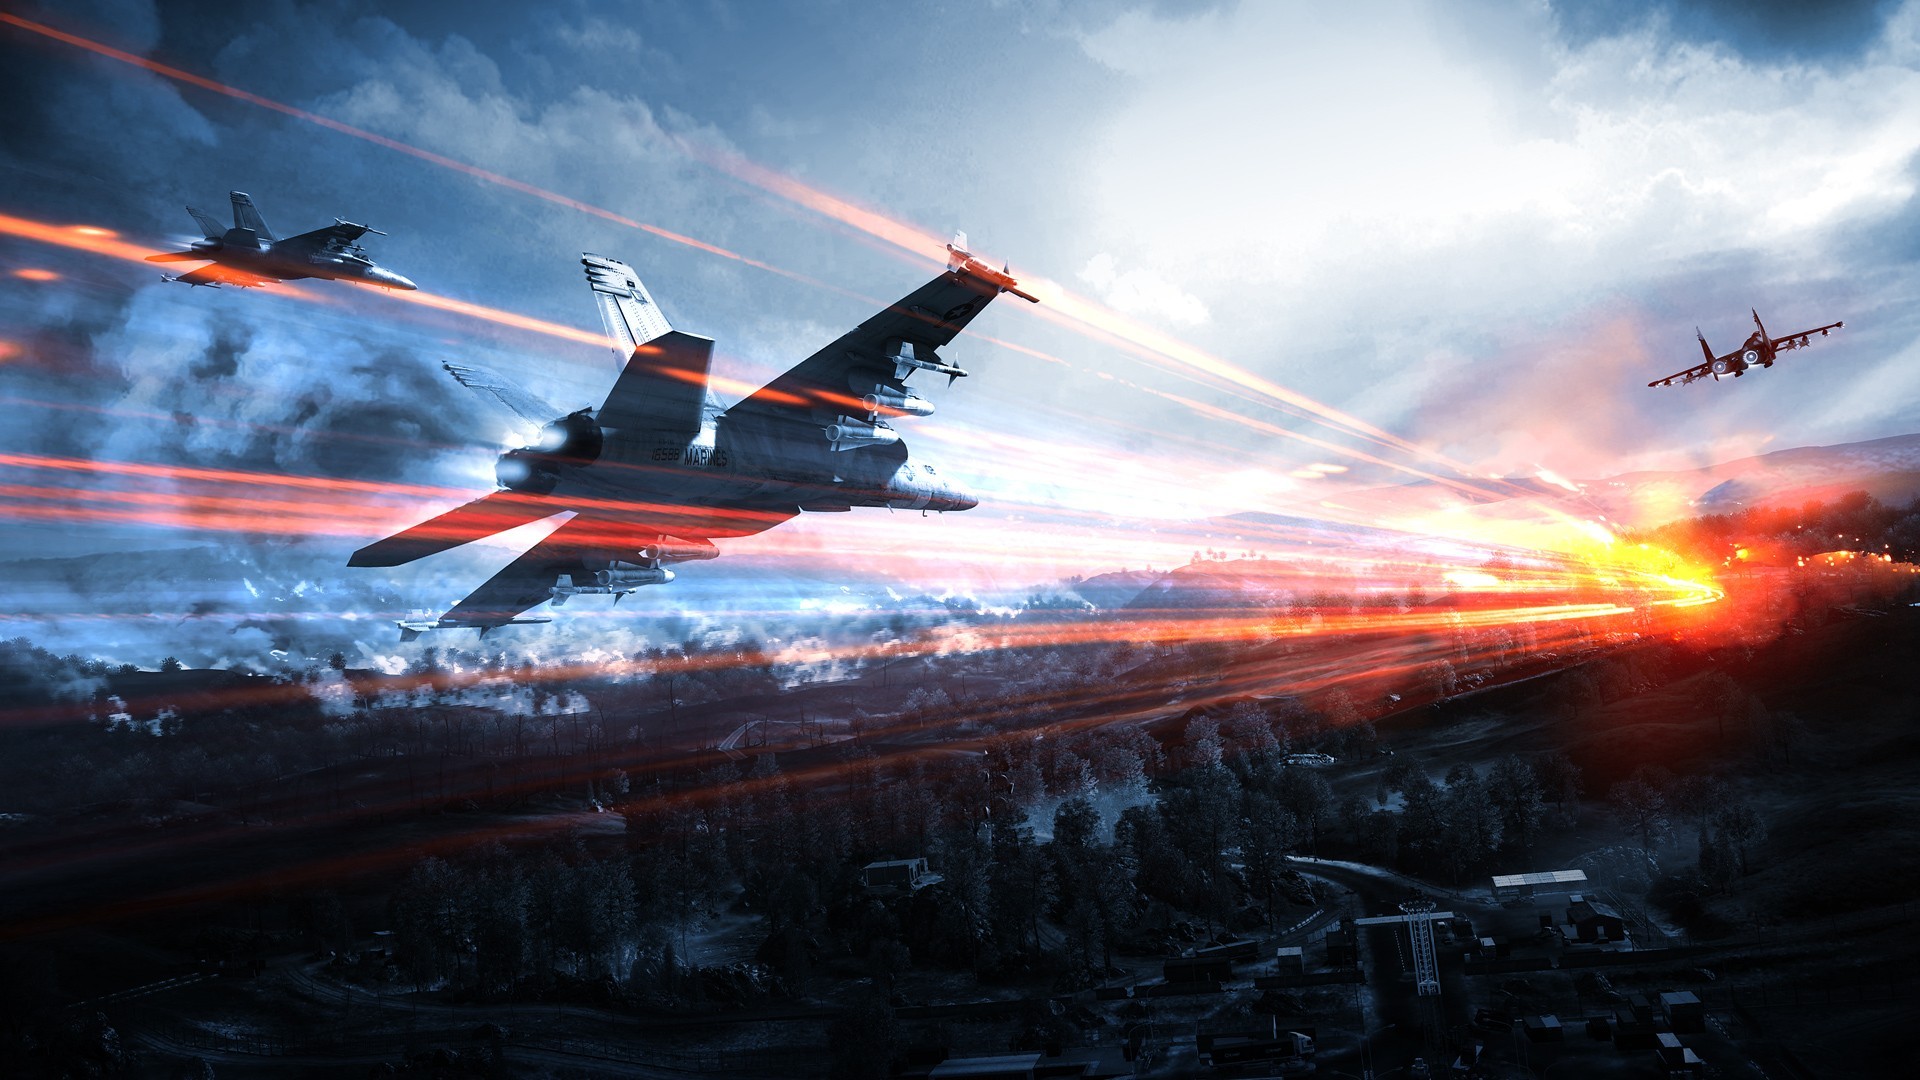 General 1920x1080 McDonnell Douglas F/A-18 Hornet Battlefield 3 video games cyan orange PC gaming jet fighter aircraft video game art EA Games military vehicle